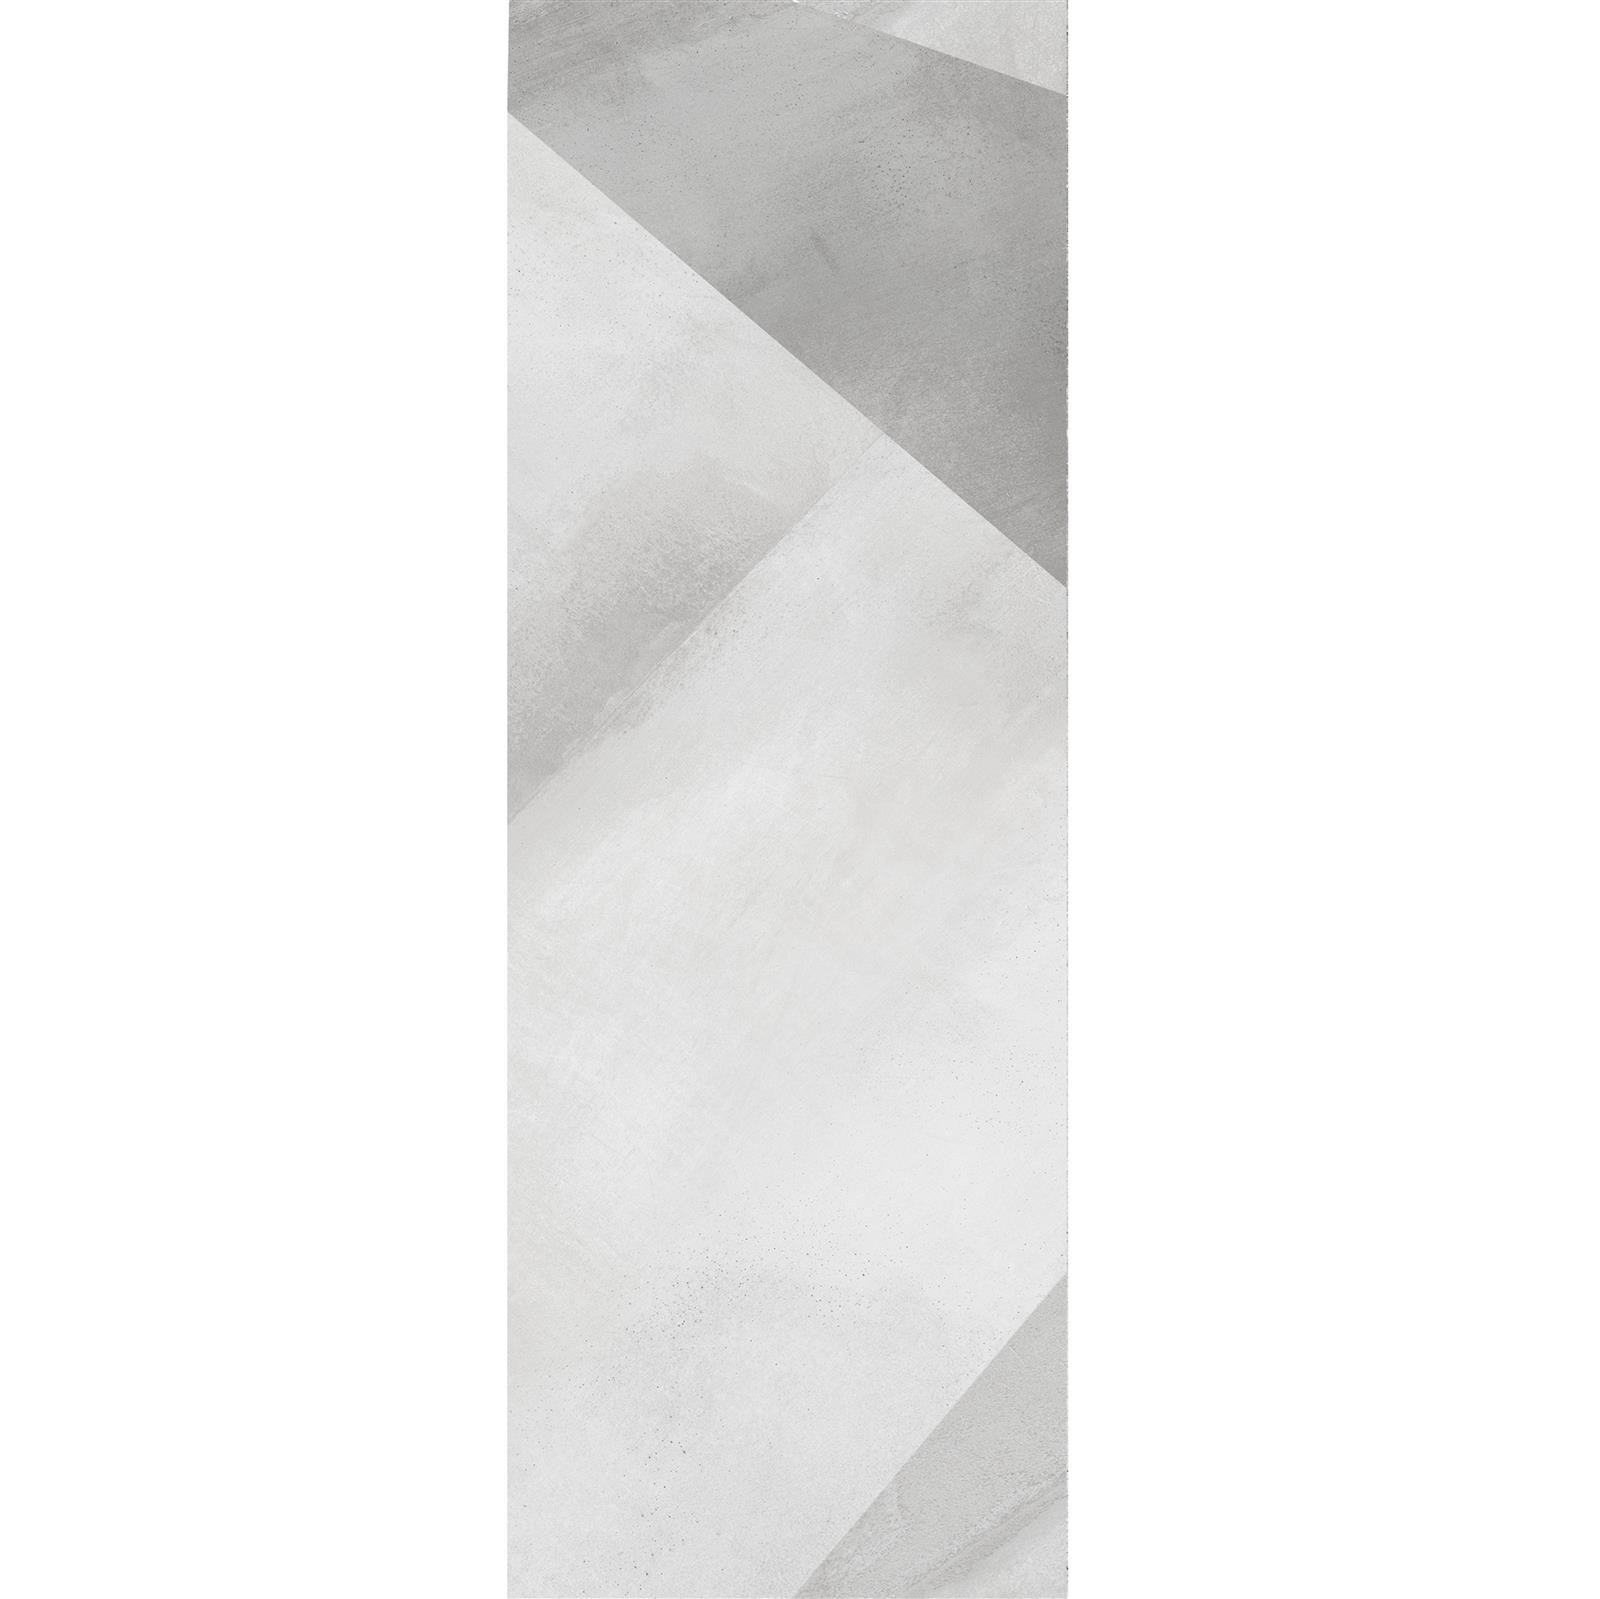 Wall Tiles Queens Rectified White Decor 1 30x90cm